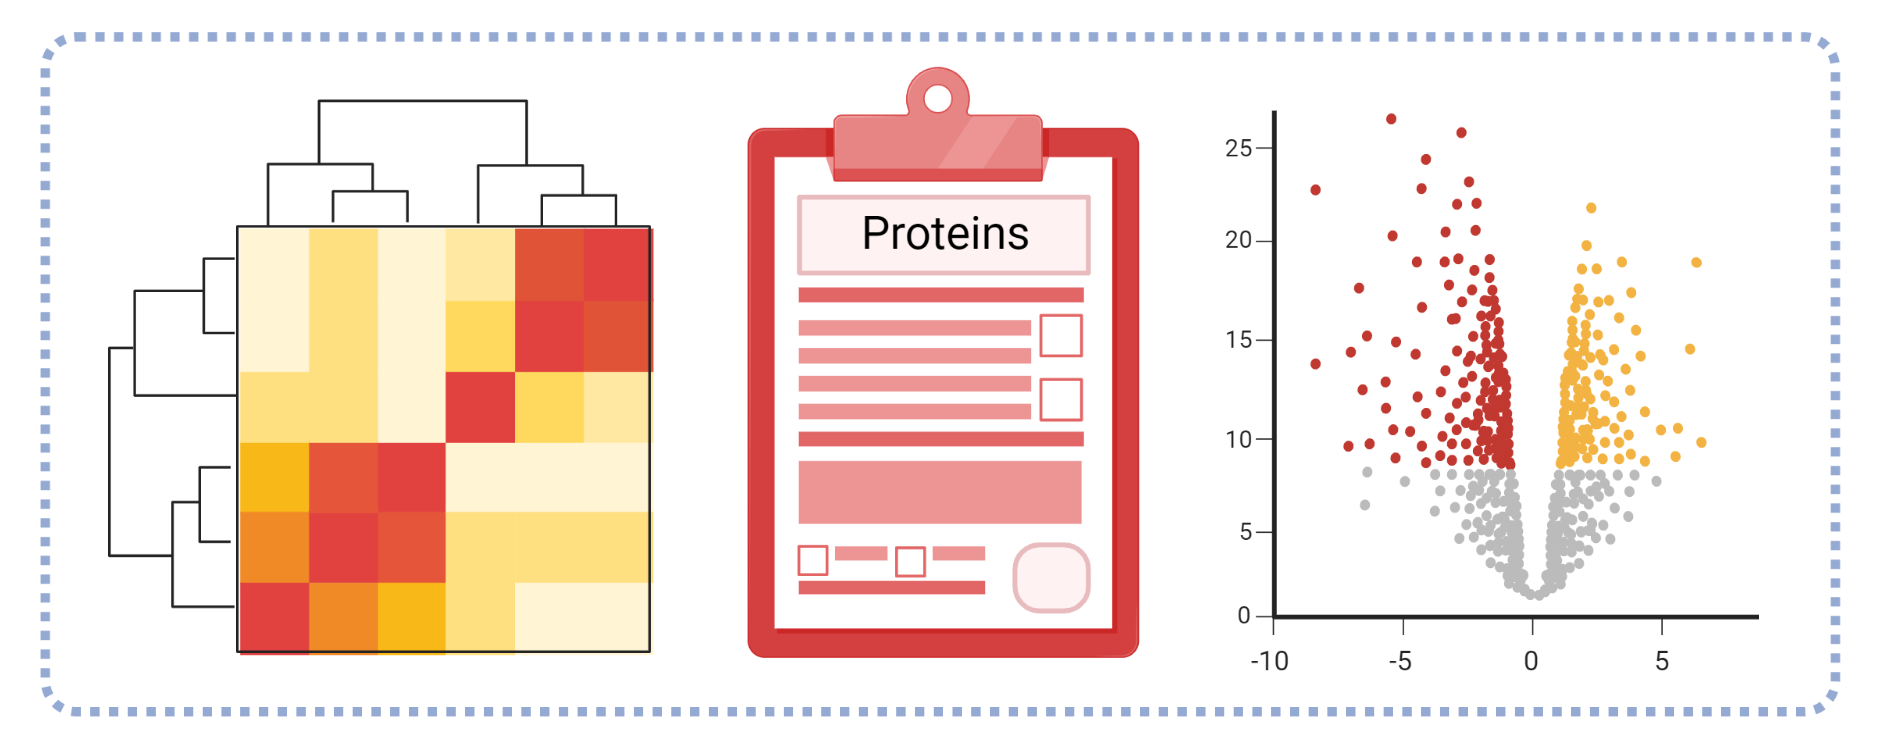 Workflow for protein identification.Proteins are extracted and can be fractionaled,enriched or separated on a gel followed by digestion with protease into small peptides between 8 and 30 aminoacids. These peptides can first be enriched or fractionaled followed by a clean-up and then separated using chromatography and detected by mass spectrometry and fragmented. The data is then analyzed using Peaks 10.0 software and compared to protein databases which leads to protein identification. 